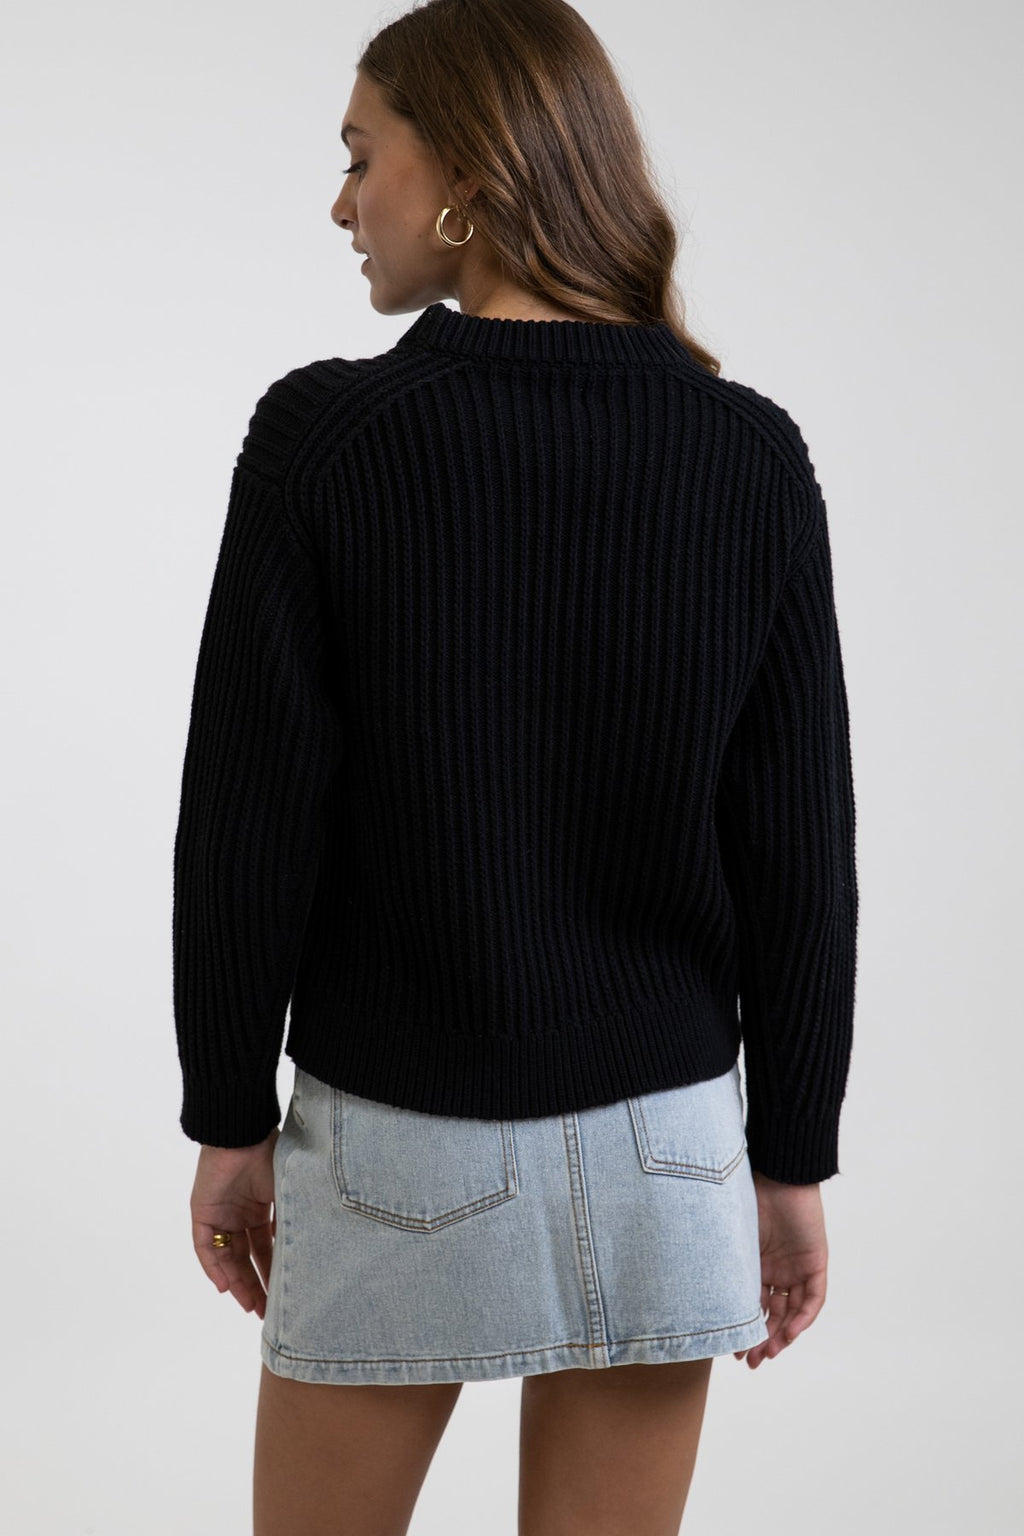 Classic Cable Knit Black